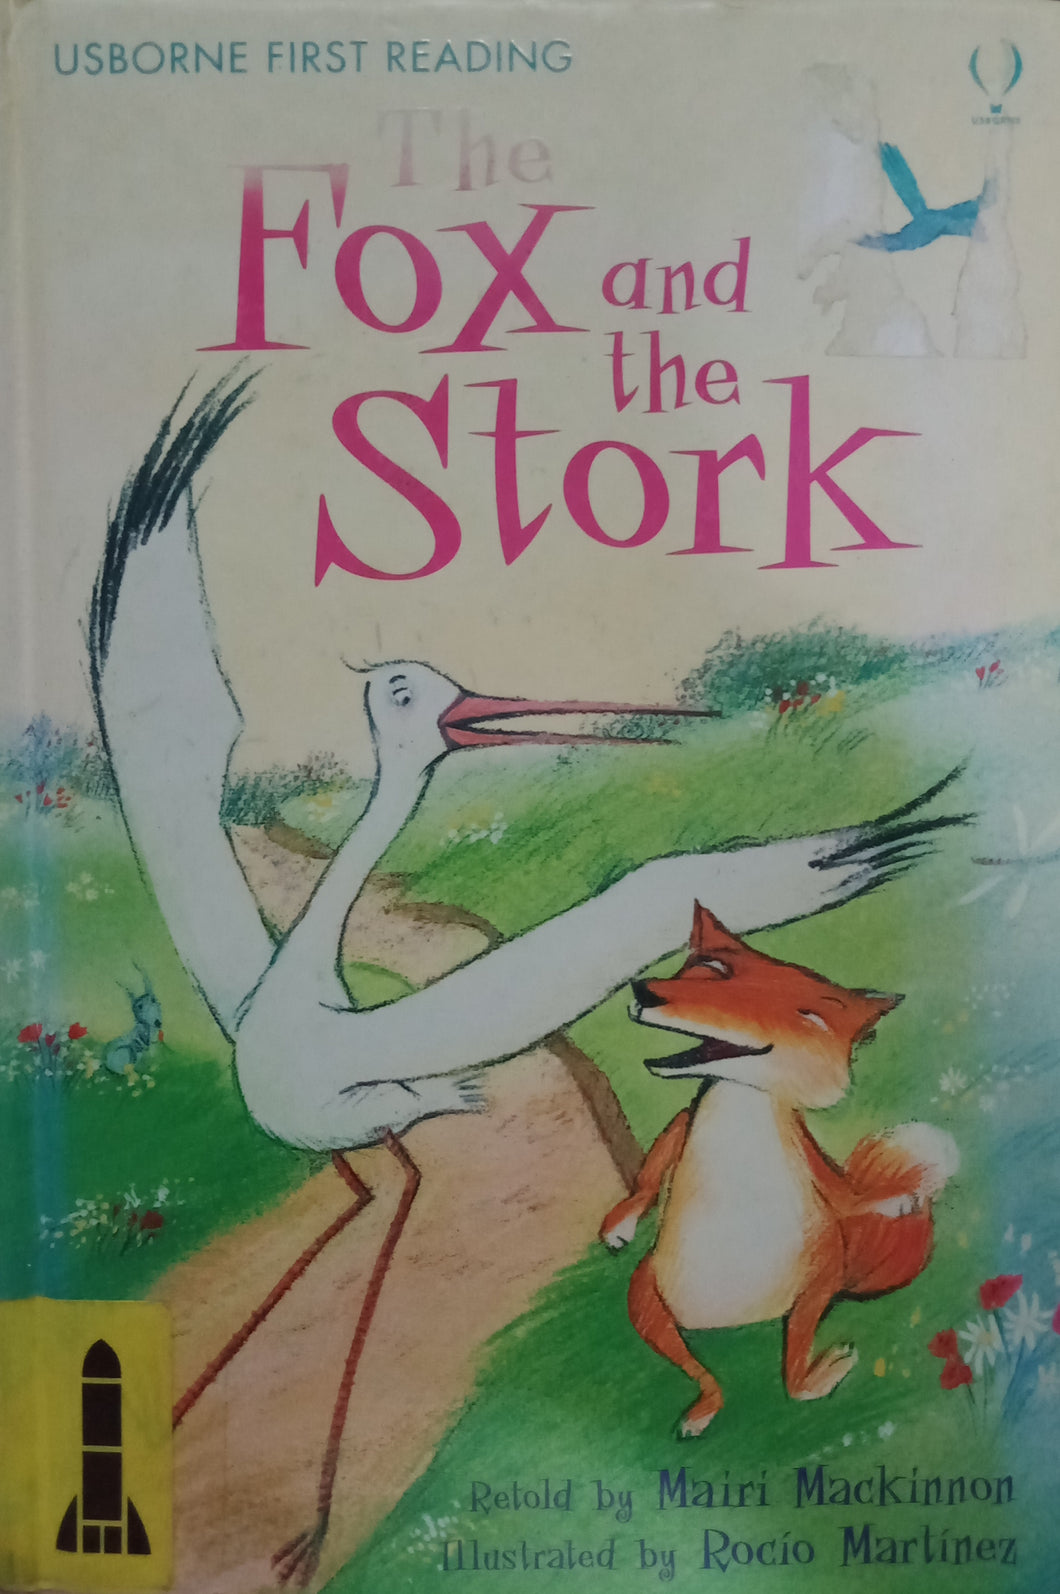 The Fox And The Stork by Mairi MacKinnon